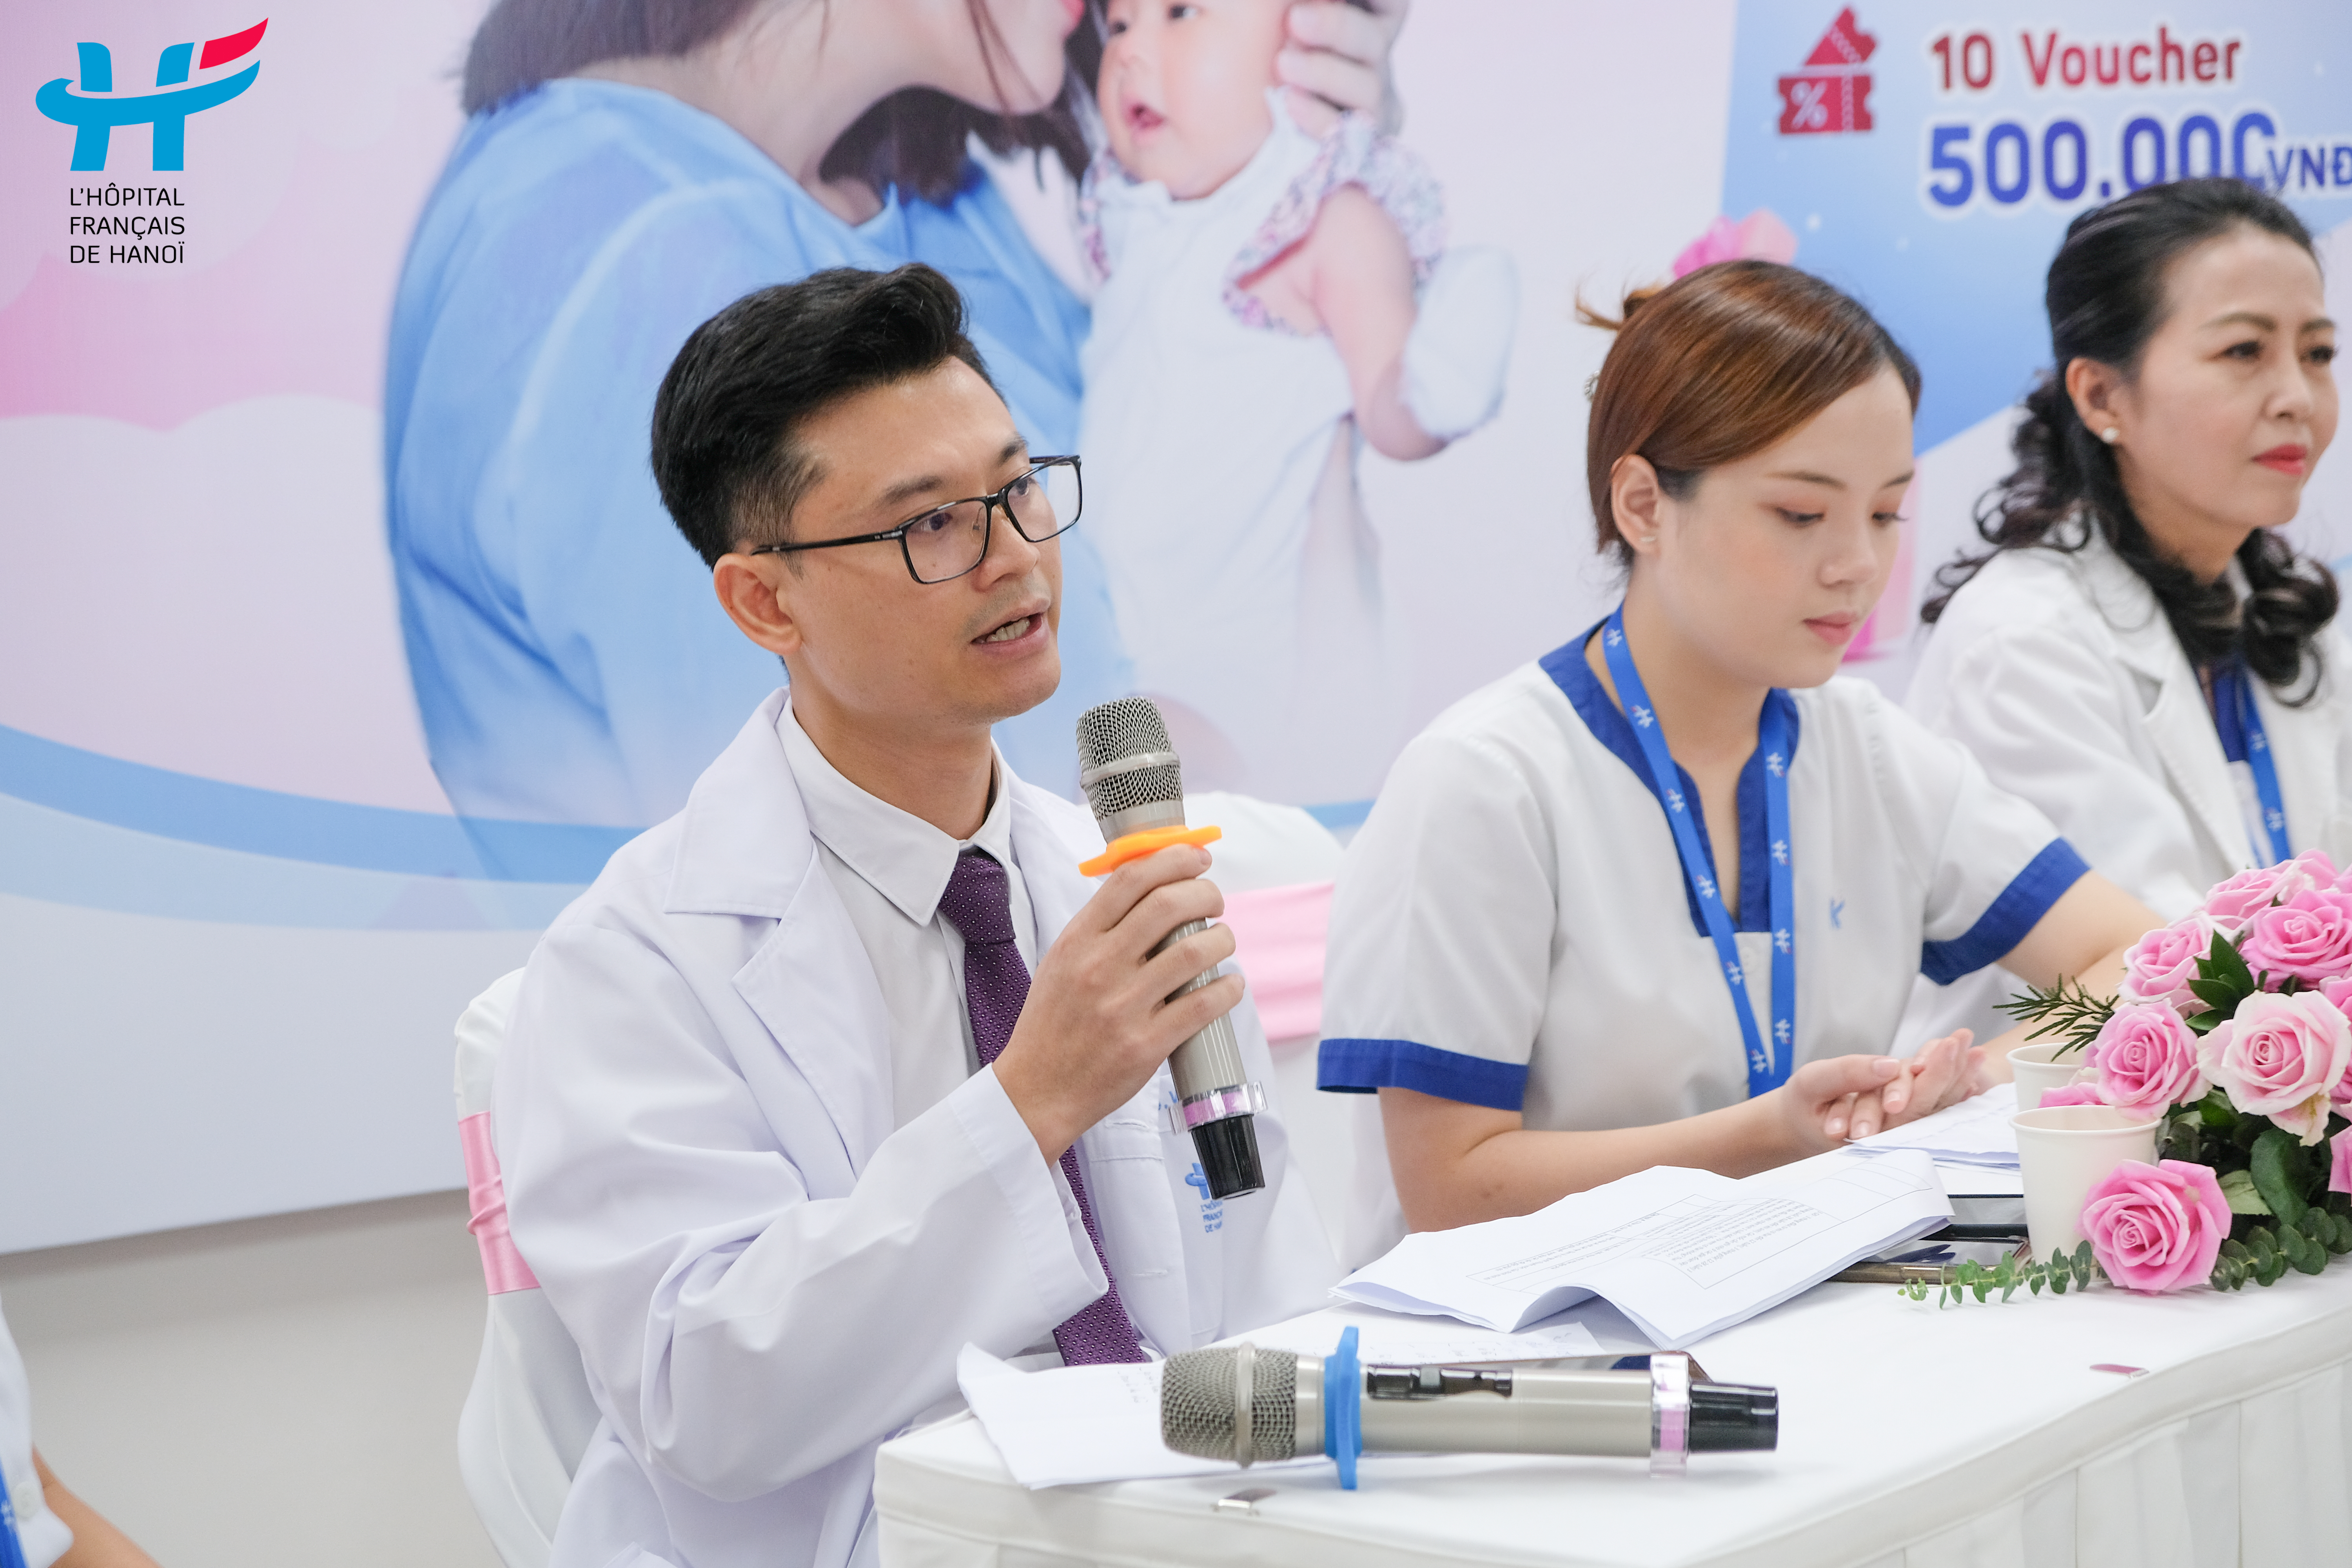 Dr. Vu Quang Hieu – HFH Obstetrics & Gynecology Department Doctor shared knowledge of Mother & Baby care